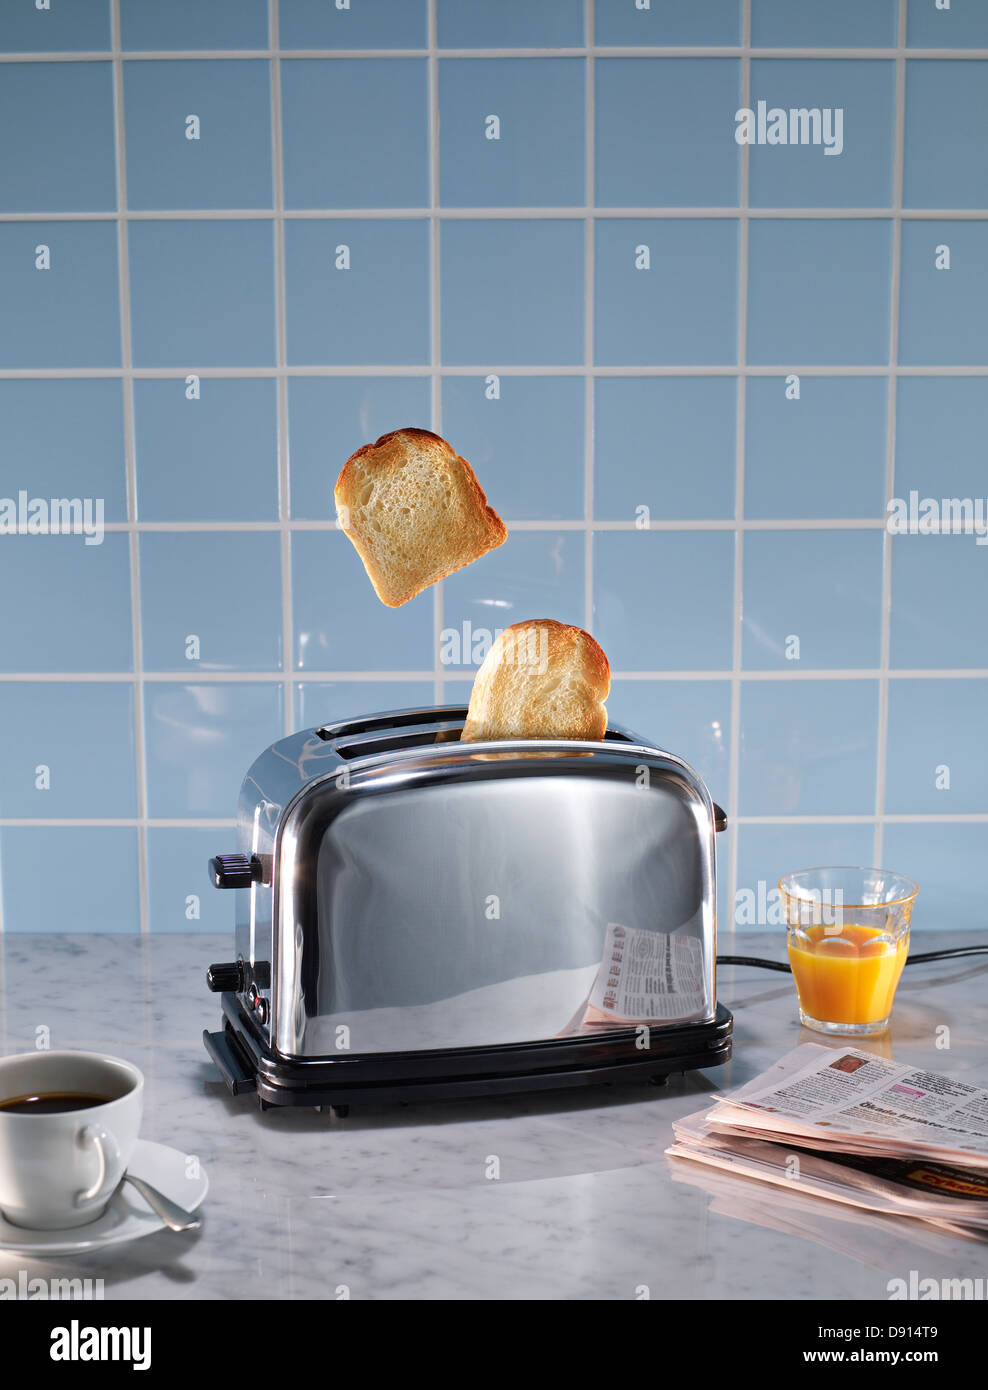 Toasted bread coming out of toaster in domestic kitchen Stock Photo